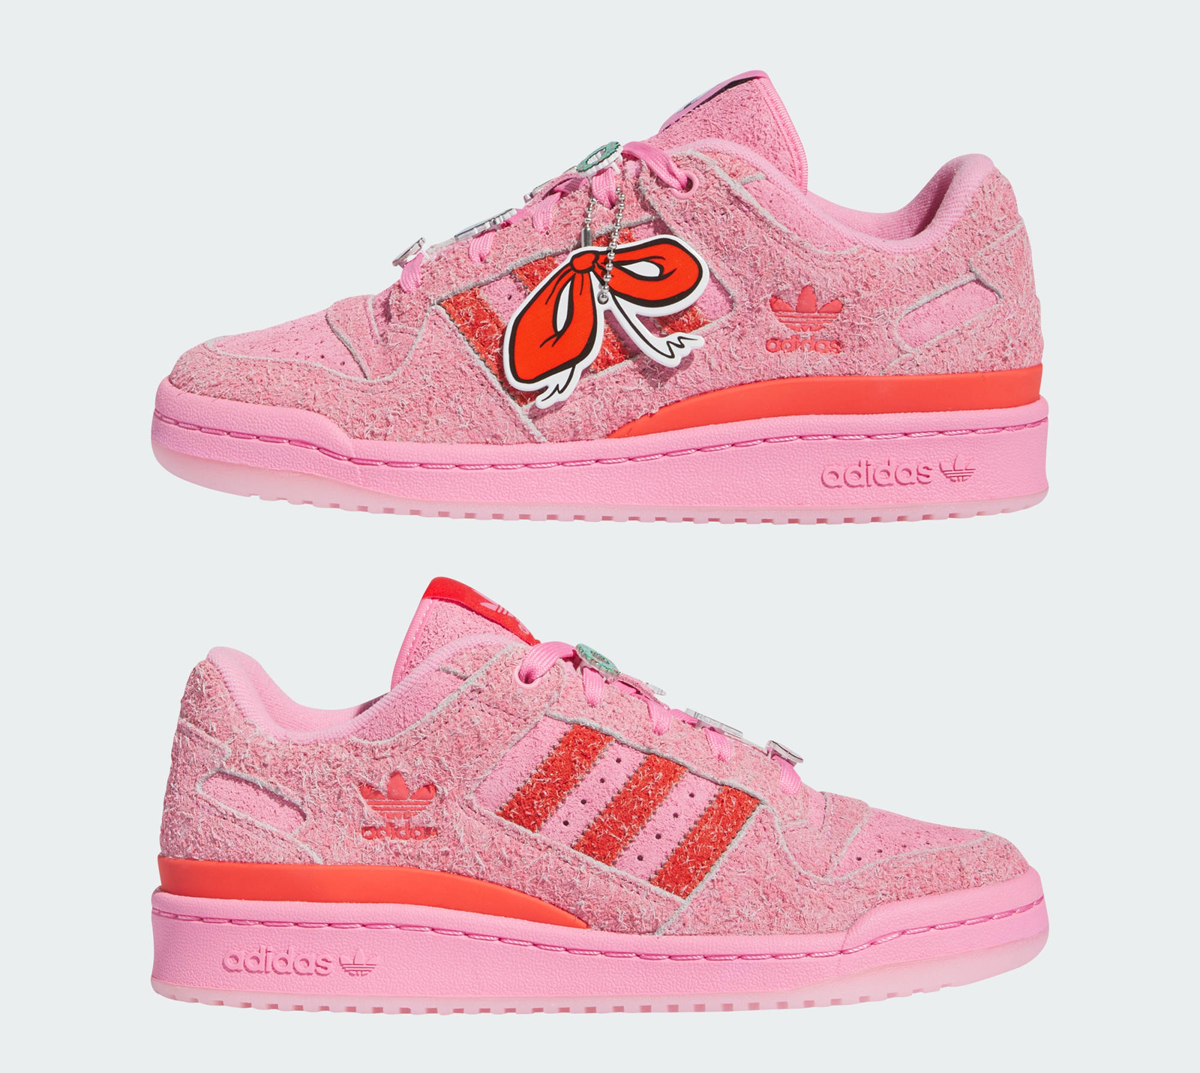 adidas-Forum-Low-The-Grinch-Pink-Cindy-Lou-Who-Release-Date-11